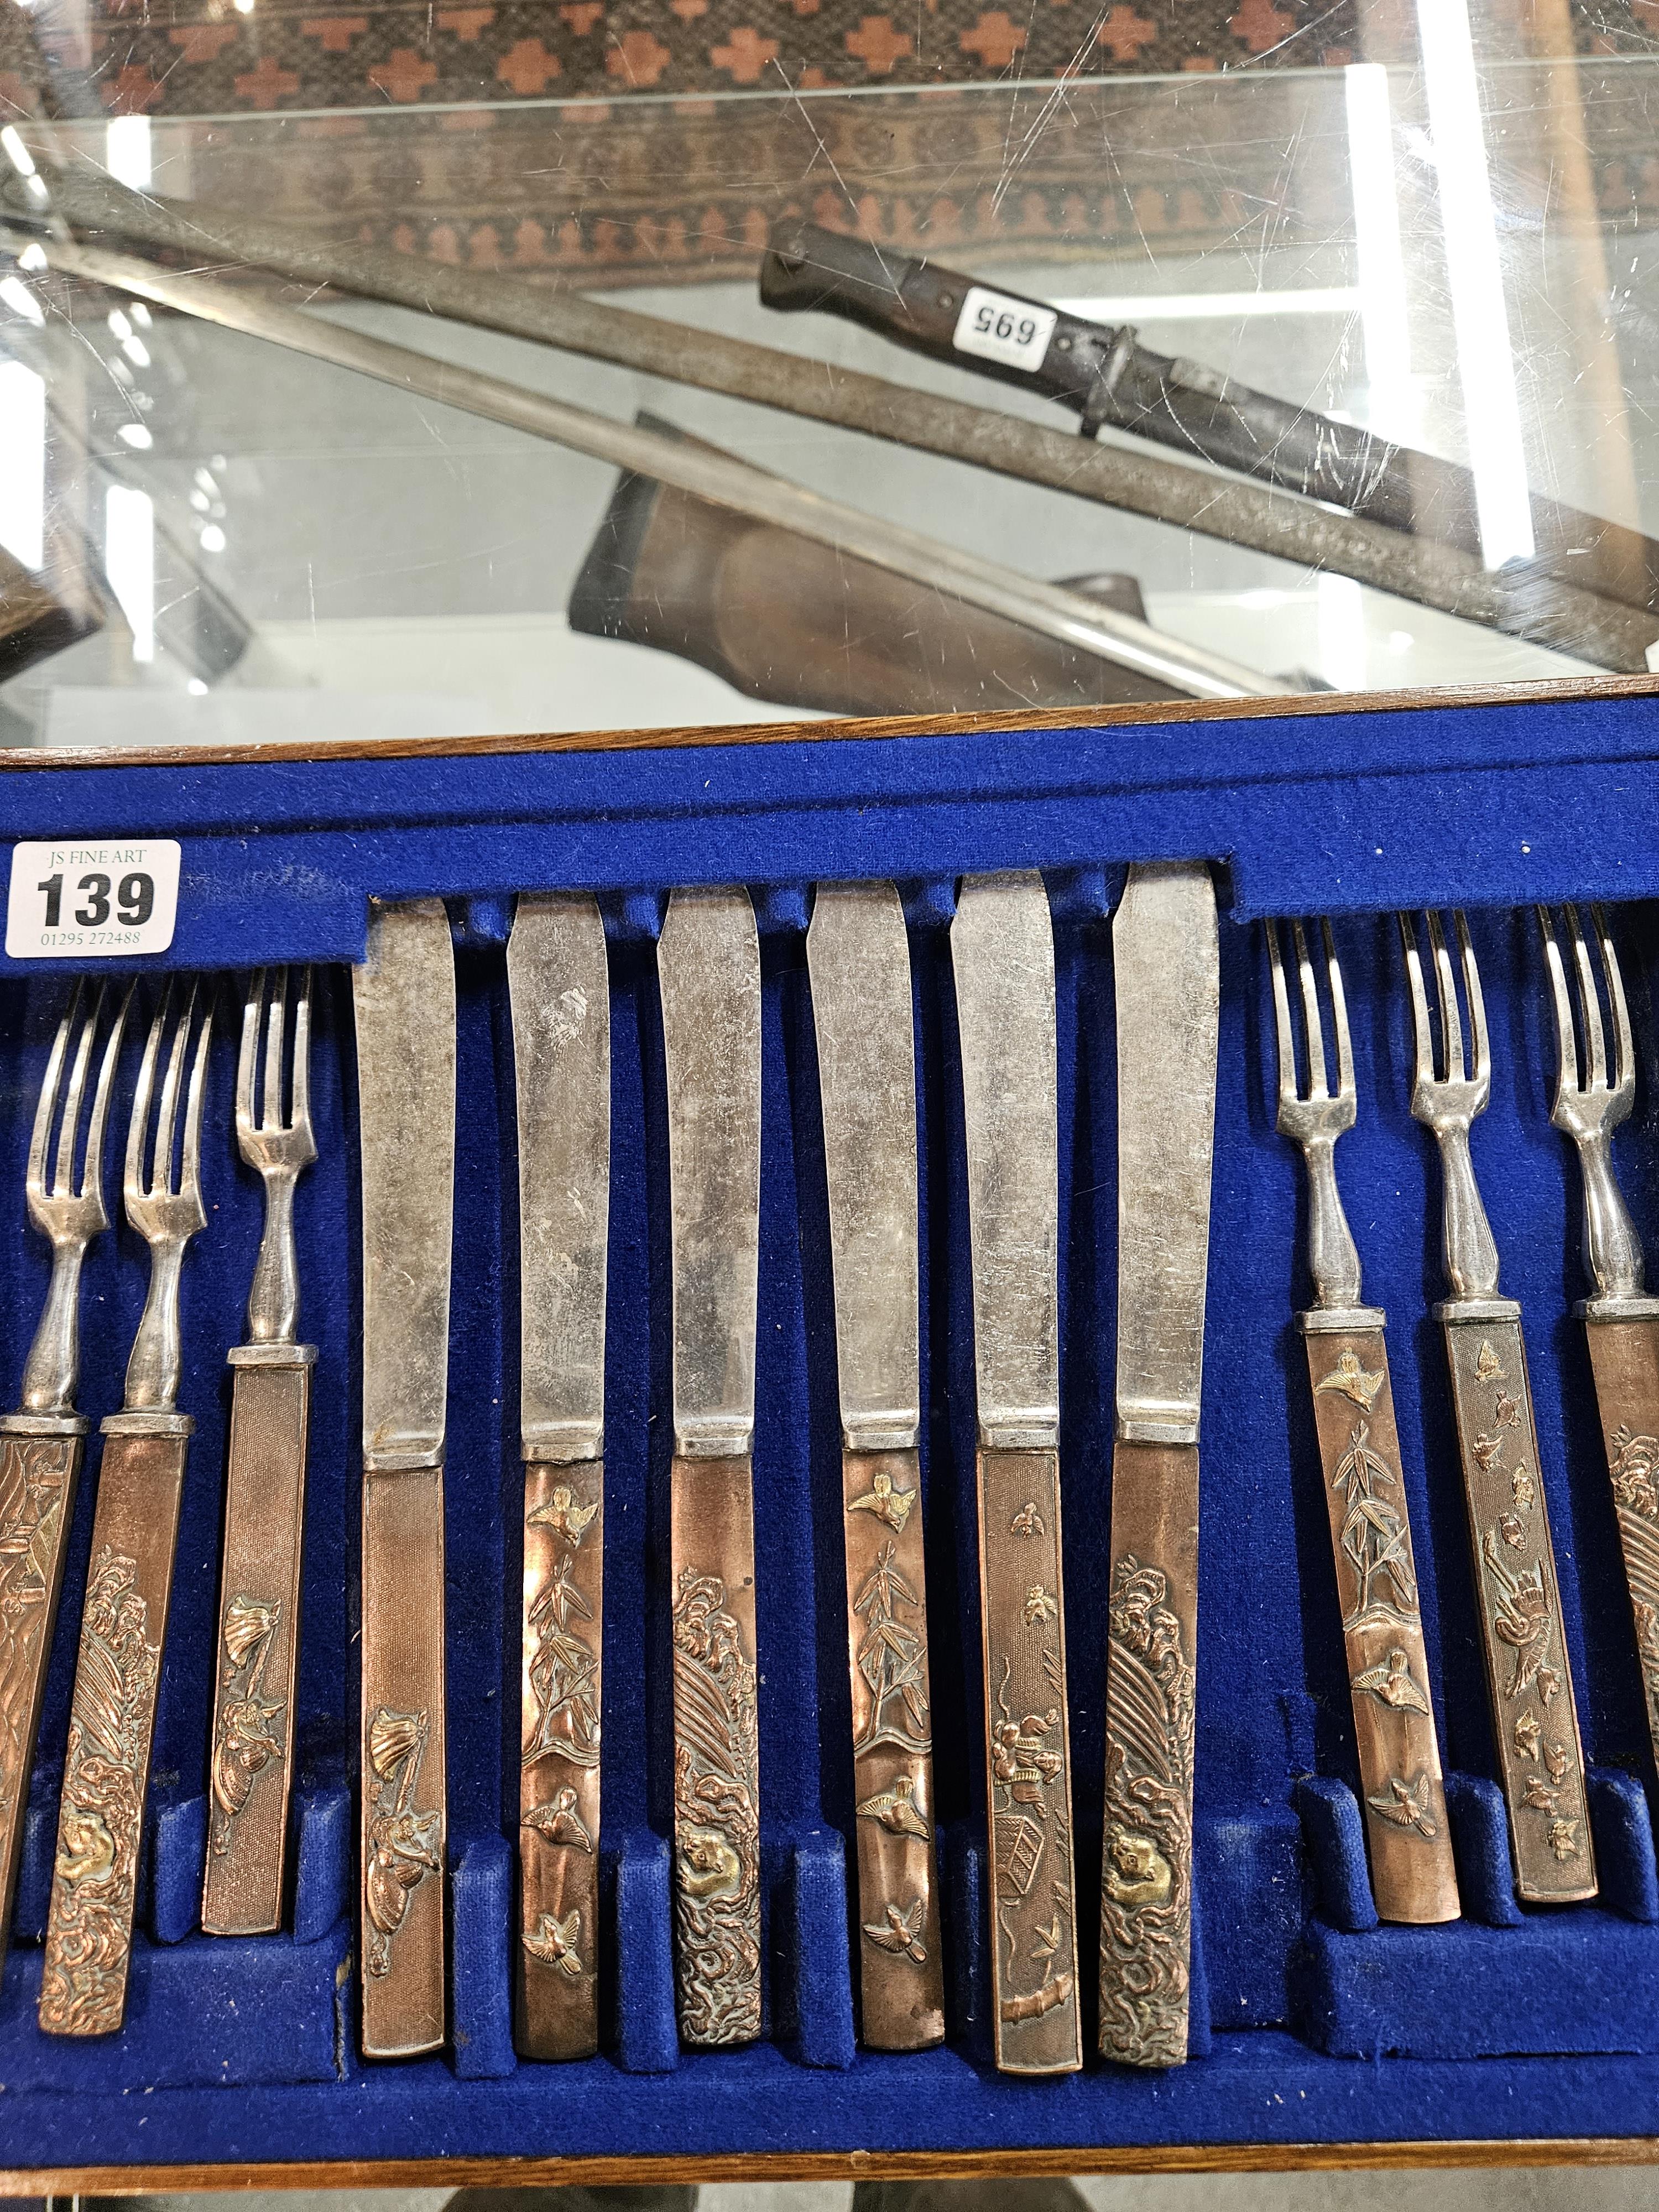 A TRAY OF SIX FRUIT KNIVES AND FORKS, EACH WITH PARCEL GILT COPPER JAPANESE KOZUKA HANDLES - Image 6 of 9